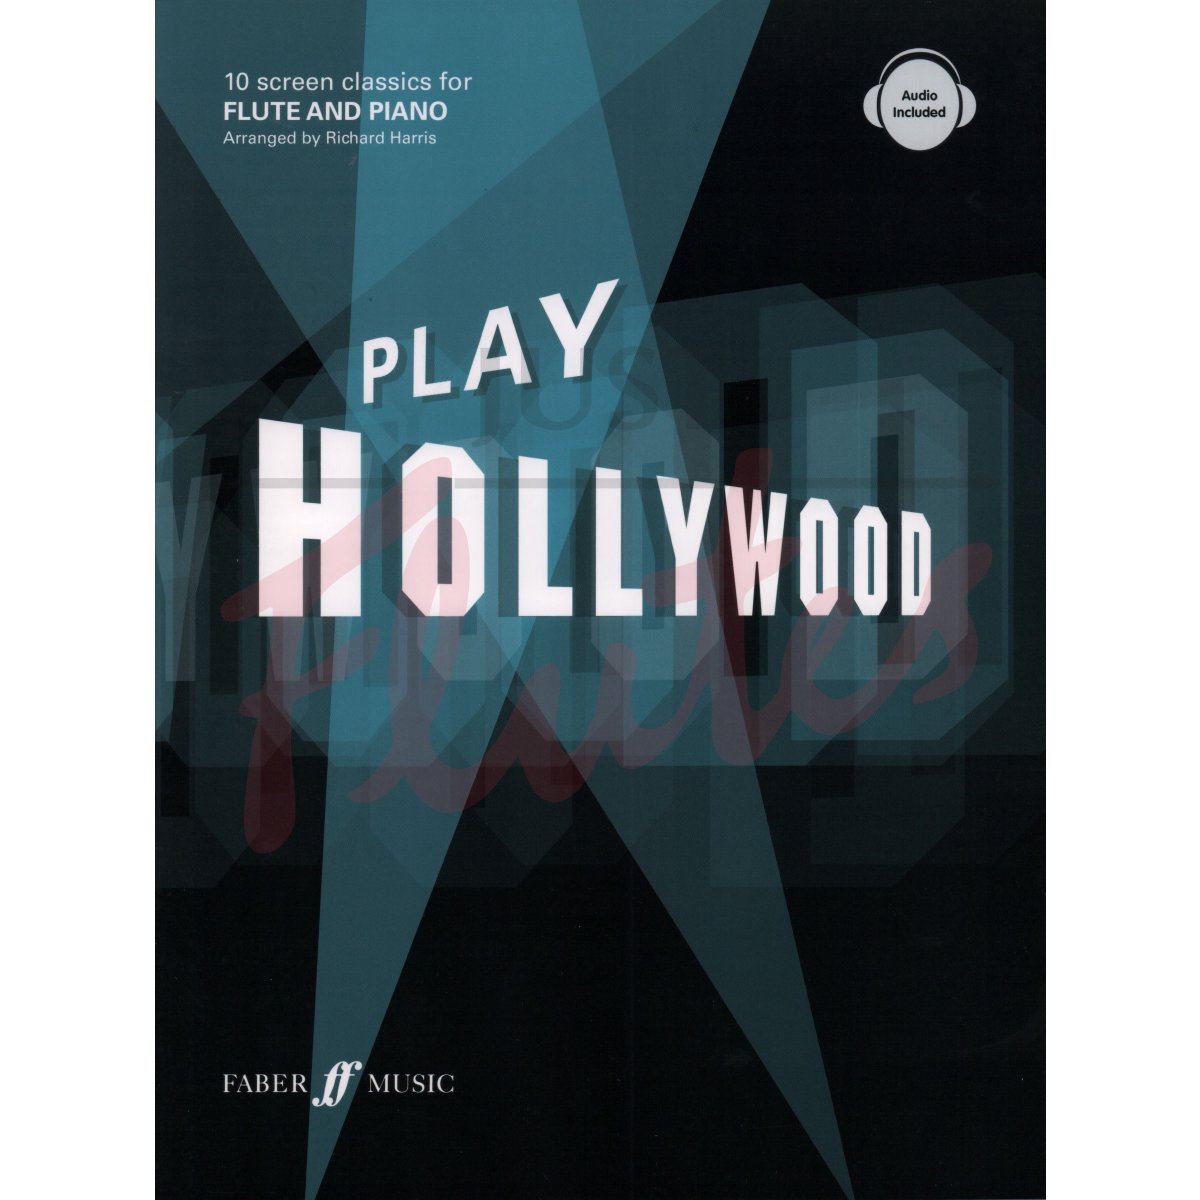 Play Hollywood: 10 Screen Classics for Flute